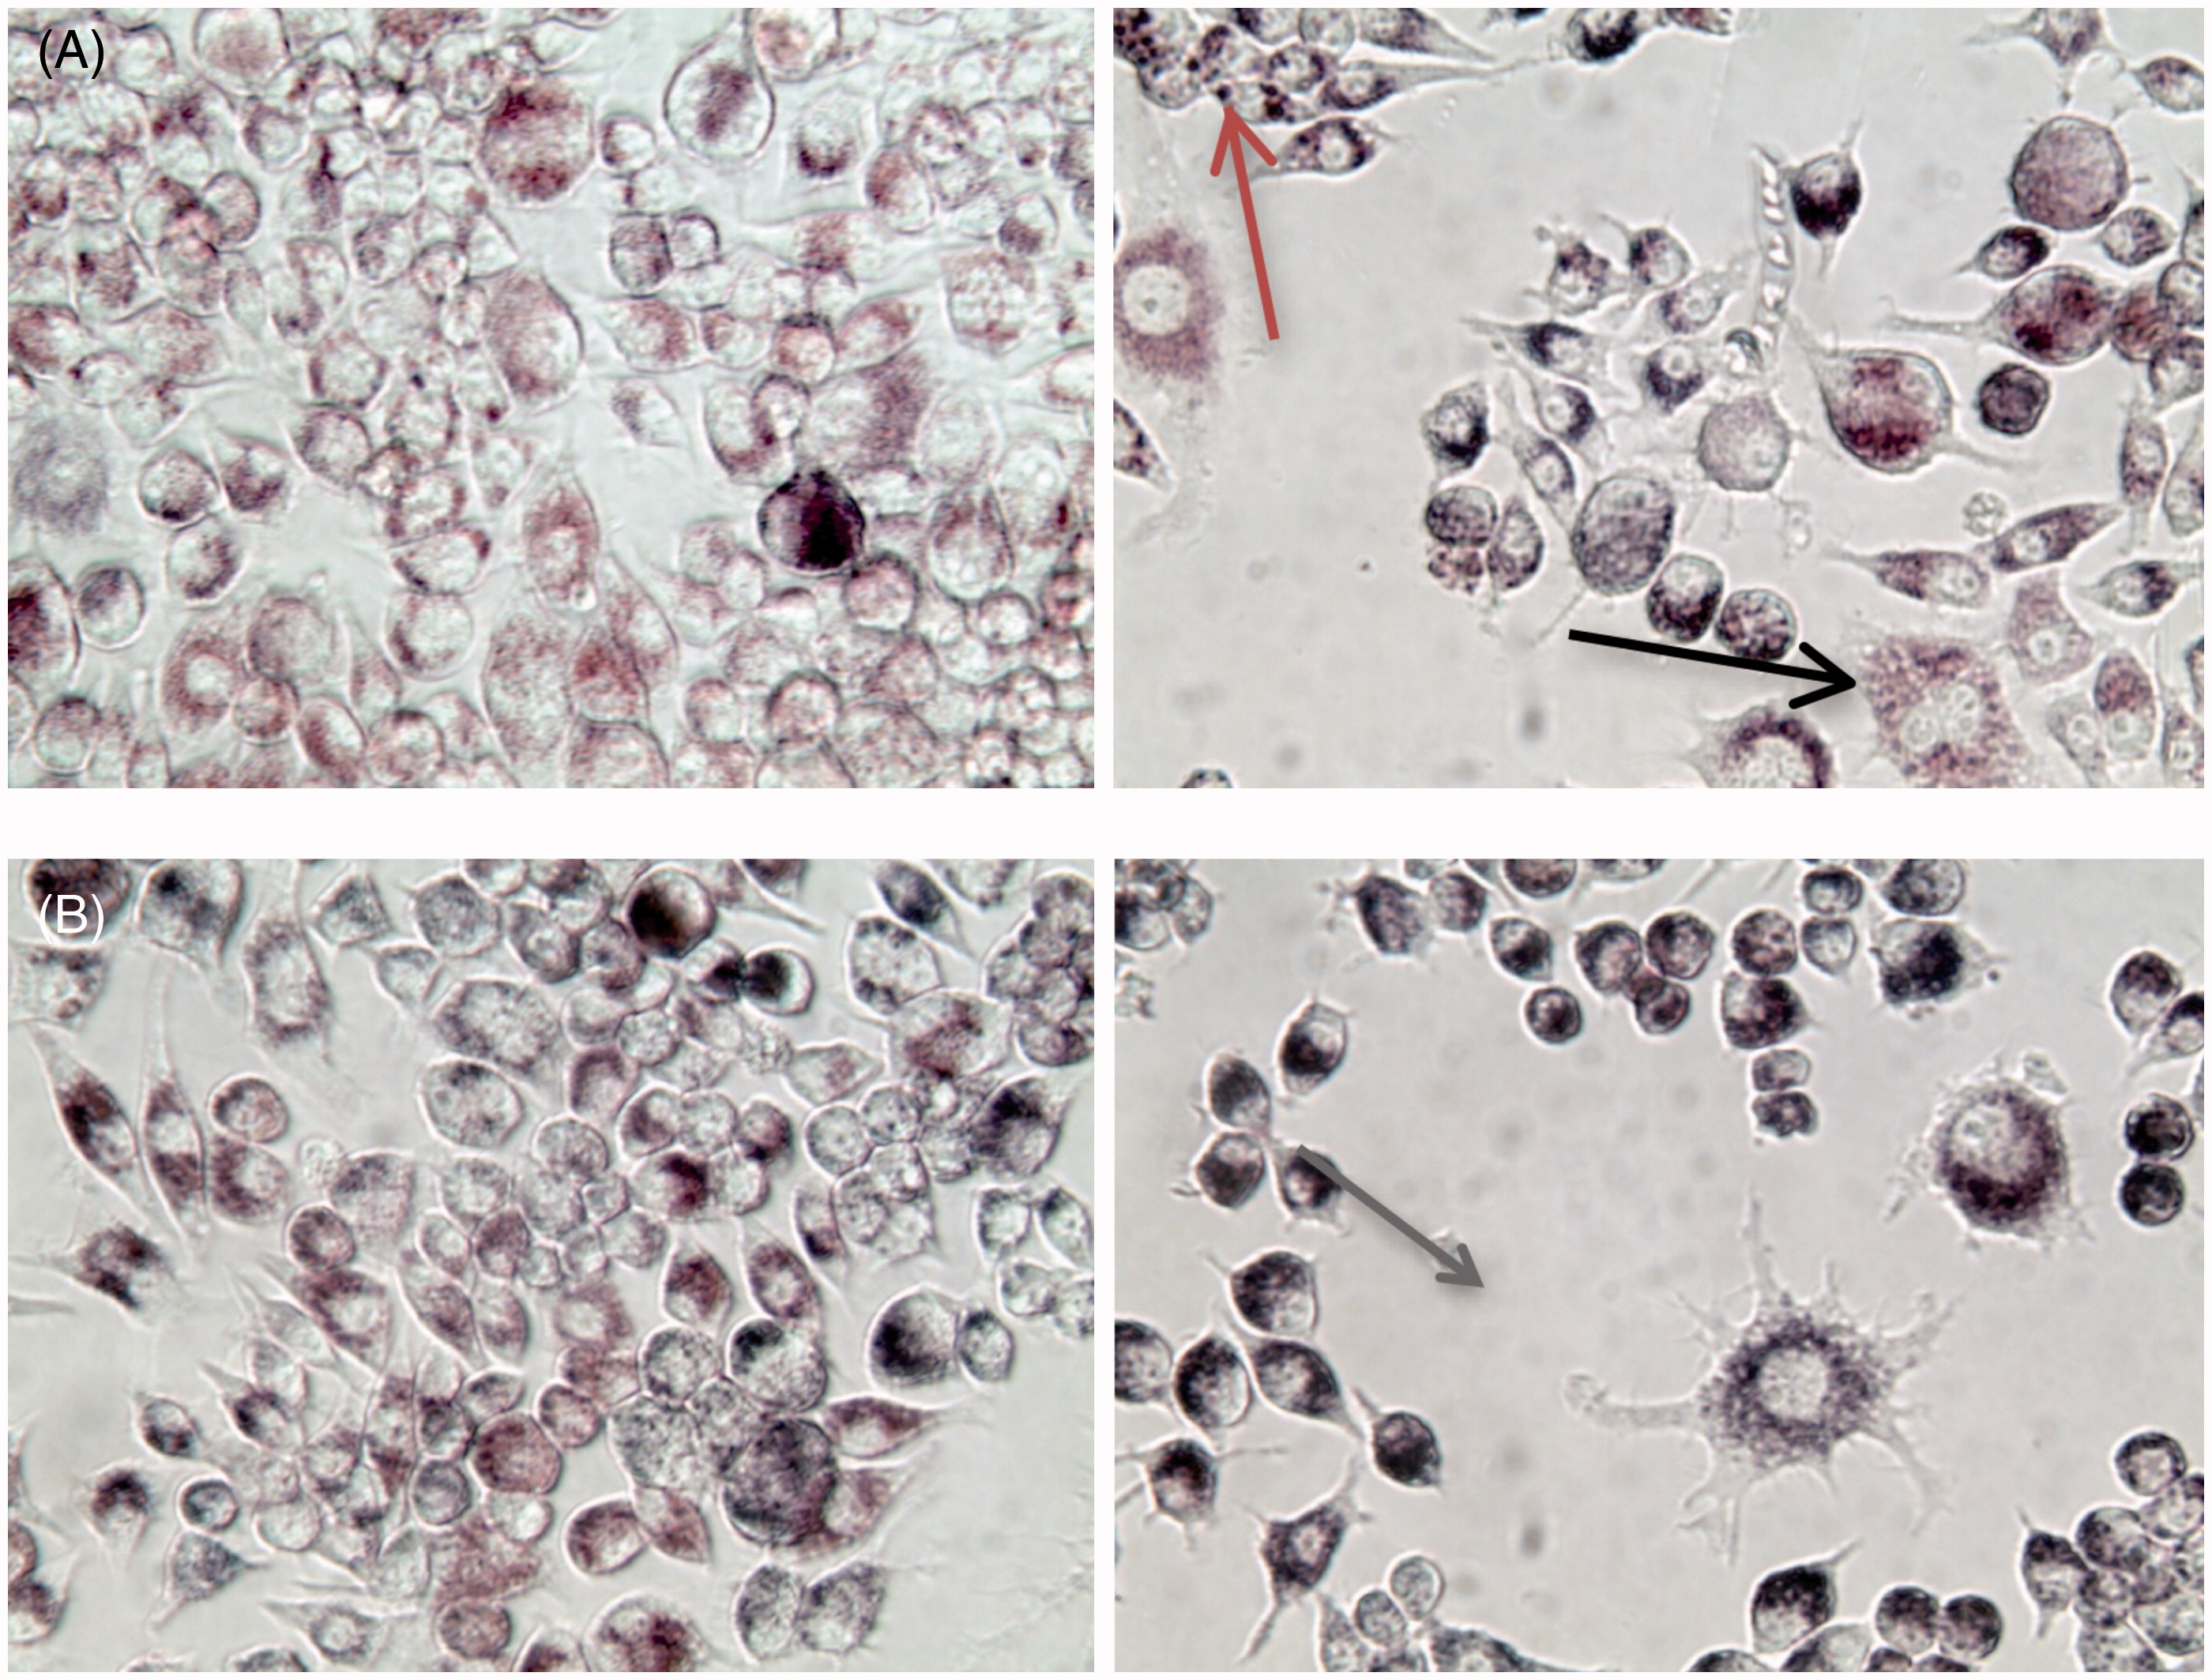 Figure 1. RAW264.7 mouse macrophages treated for 24 h with (a) 25 µg/ml BioPure AuNP without LPS (left) and with LPS (right, 1 µg/ml). Red/Grey arrow = AuNP concentrated in phagosomes; Black arrow = cell division. (b) Cells treated for 24 h with 50 µg/ml Econix AuNP, with and without LPS. Gray arrow = activated macrophage. Total magnification = 400×.